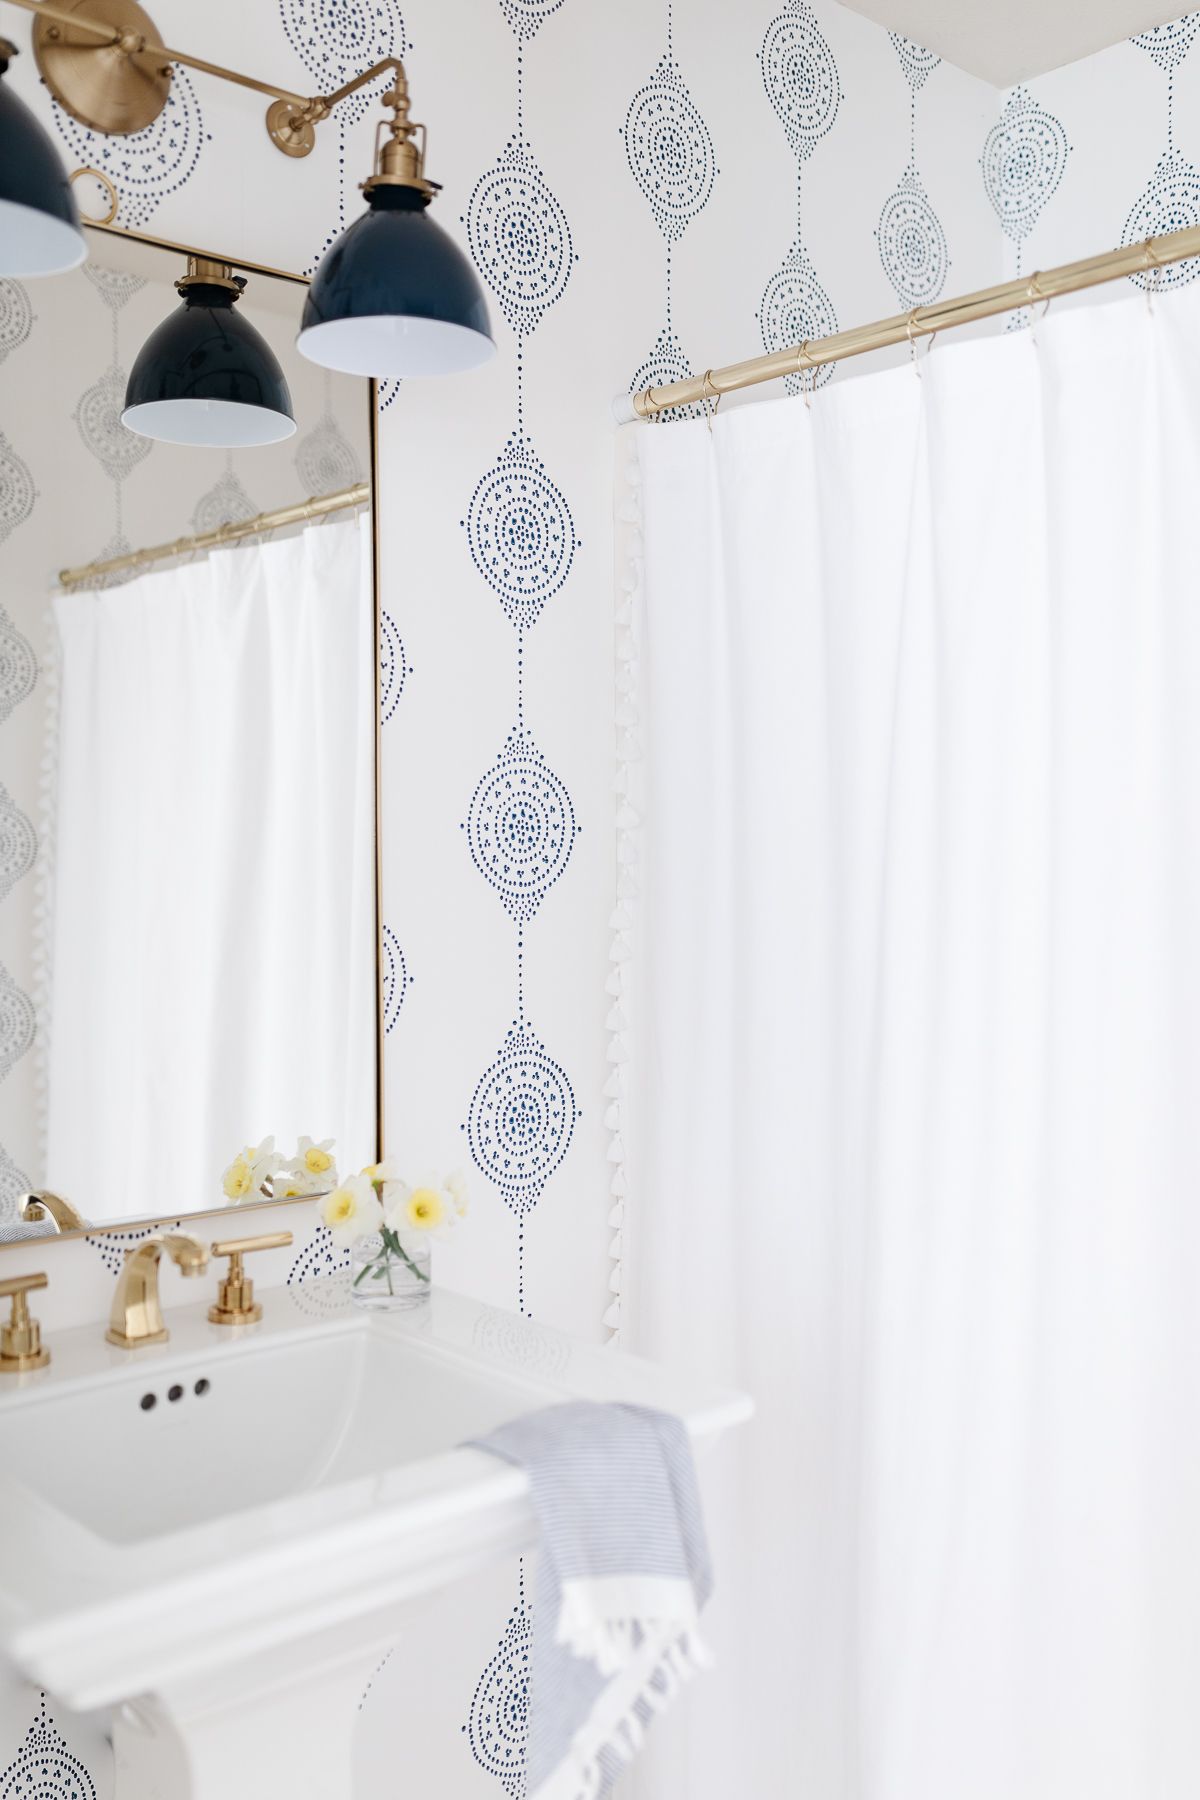 A bathroom with blue and white wallpaper and fixtures from Wayfair